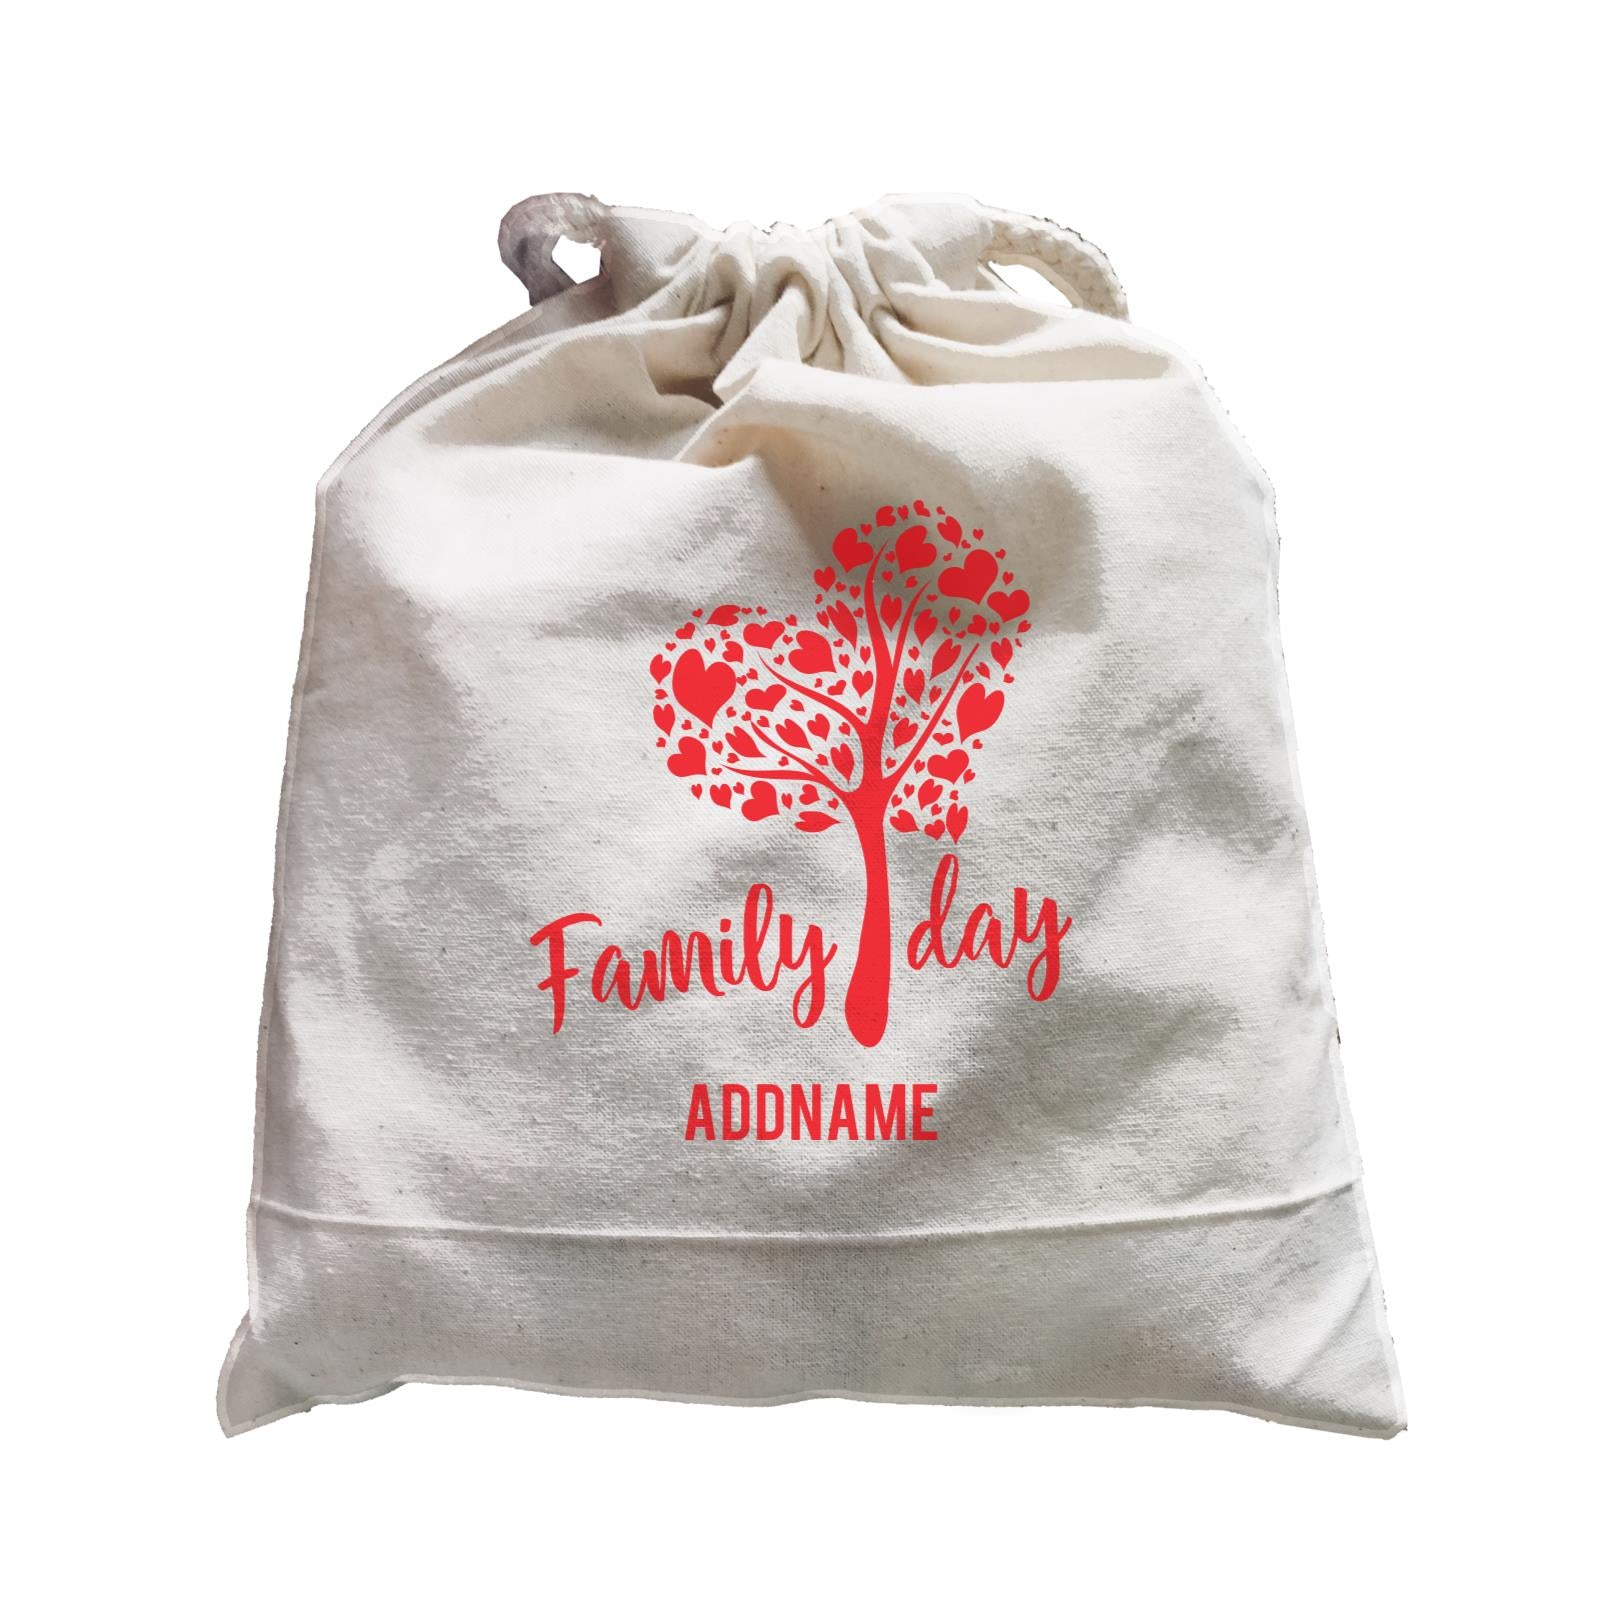 Family Day Love Tree With Love Leaves Family Day Addname Satchel